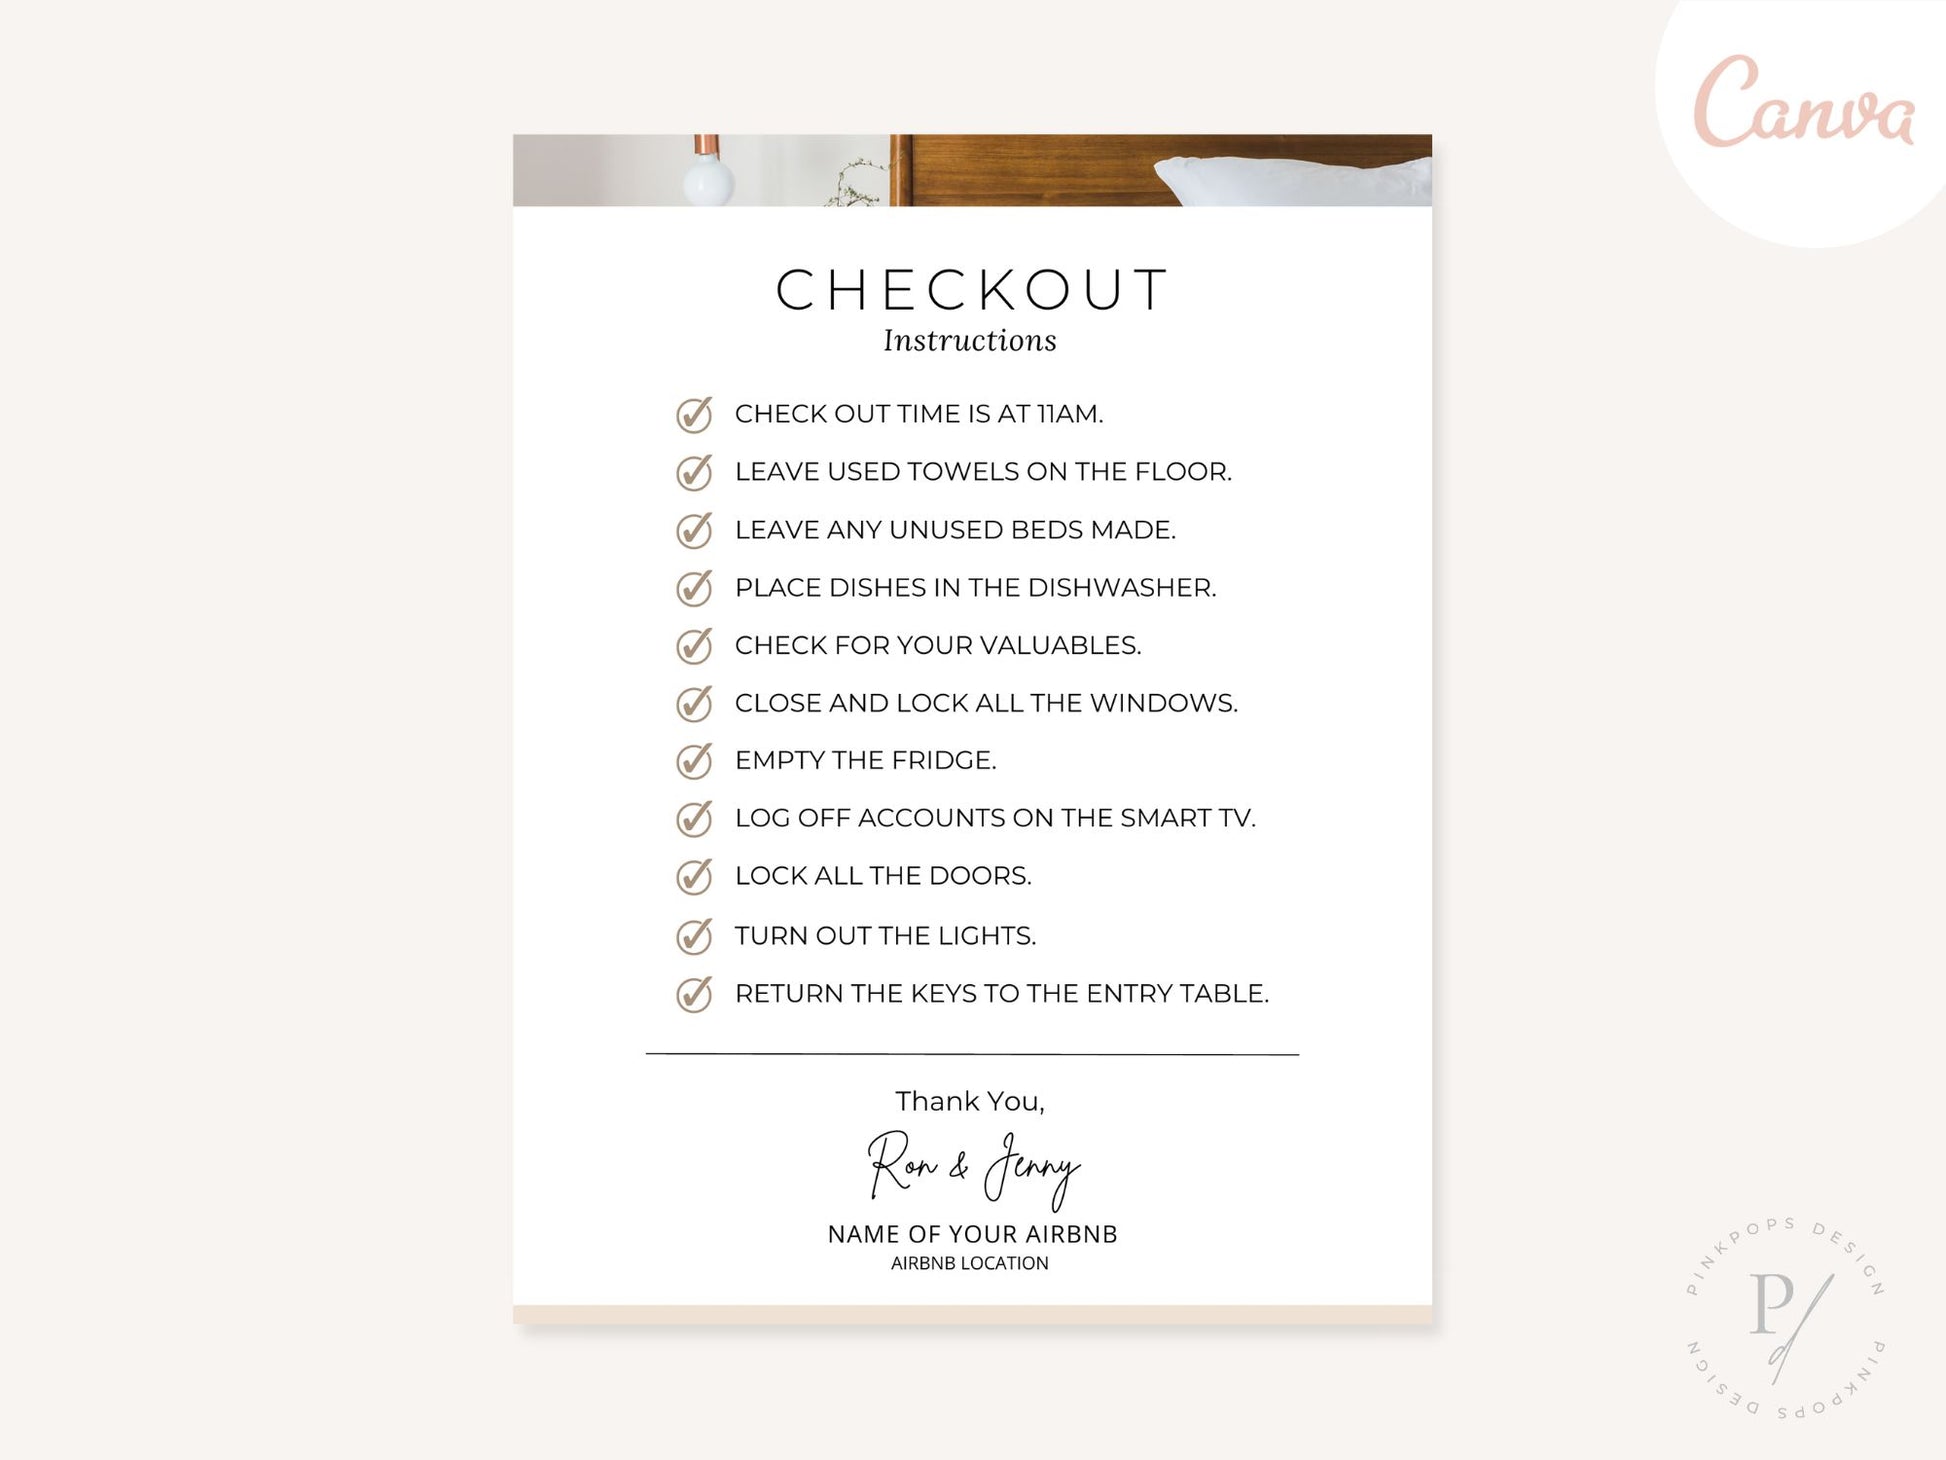 Airbnb Checkout Instructions - Editable and digital template for providing clear guidance for a hassle-free departure in your vacation rental.